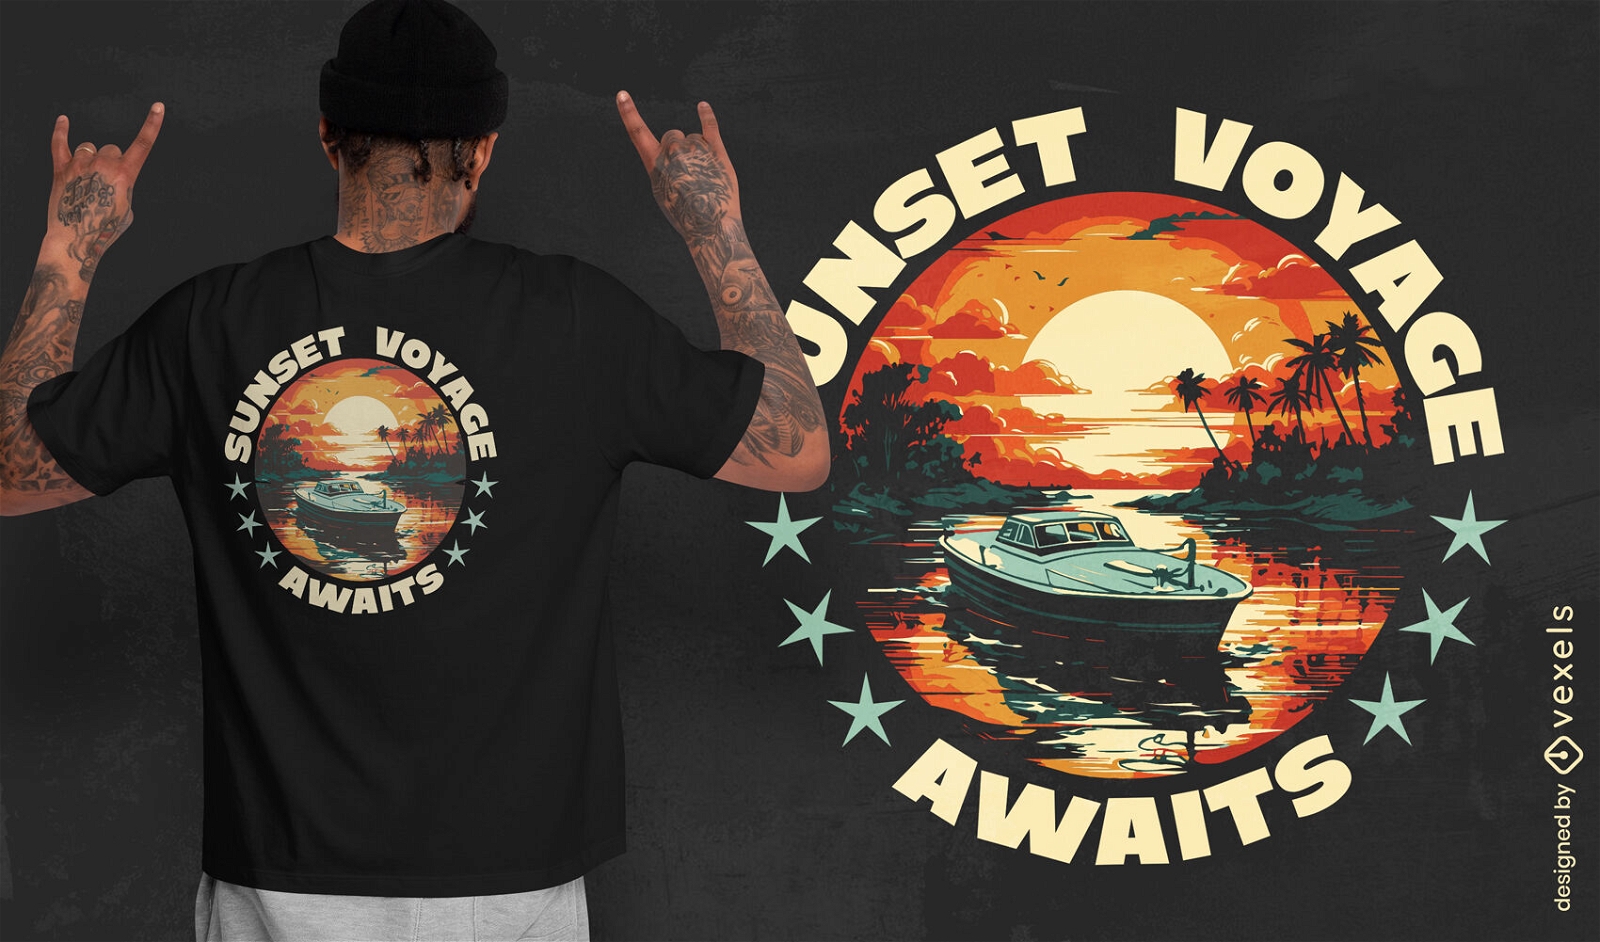 Boat in the water sunset t-shirt design